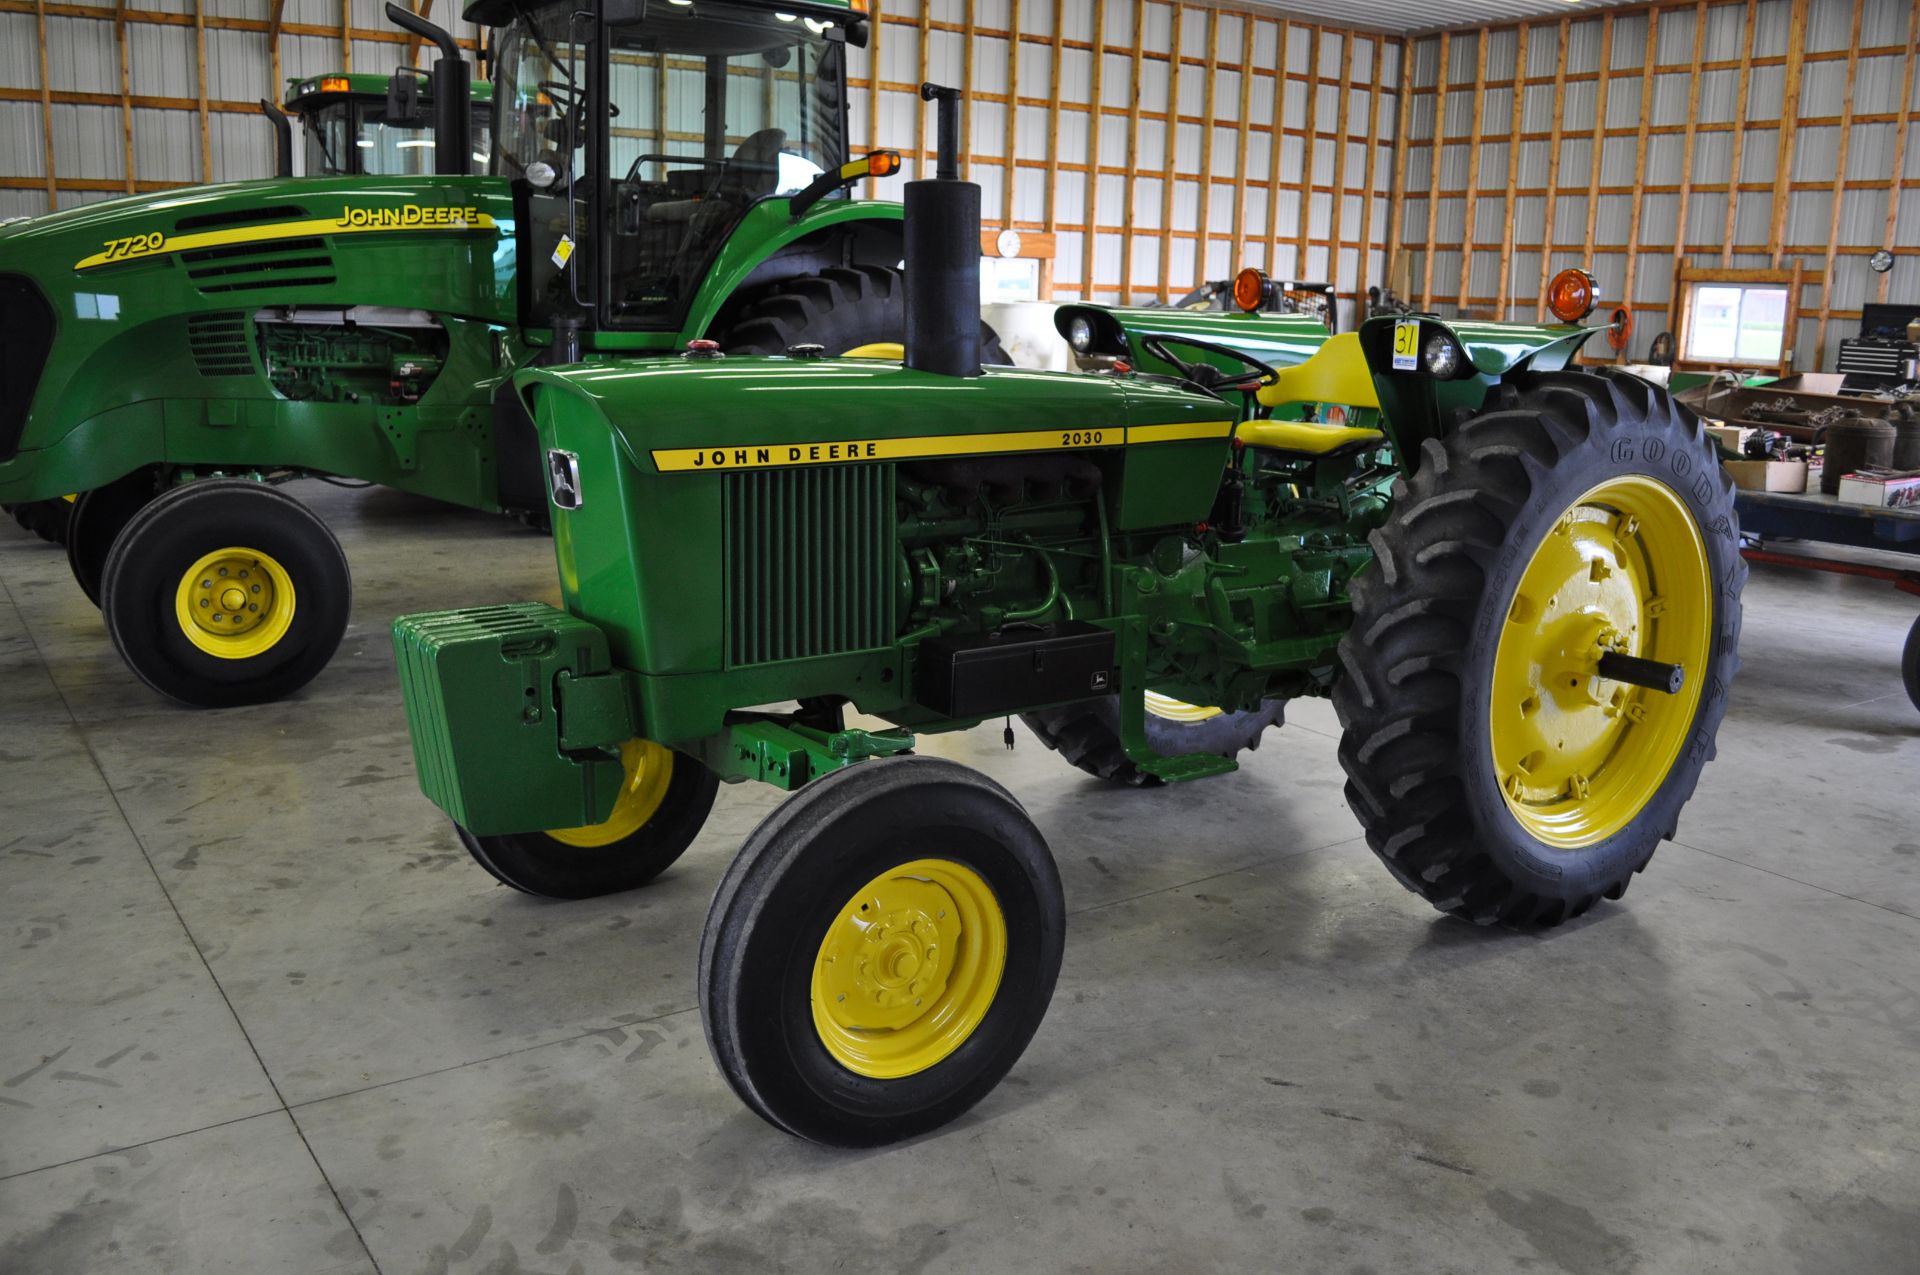 John Deere 2030 tractor, 13.6-38 rear, 7.5-16 front, front wts, 2 hyd remotes, 3 pt, quick hitch